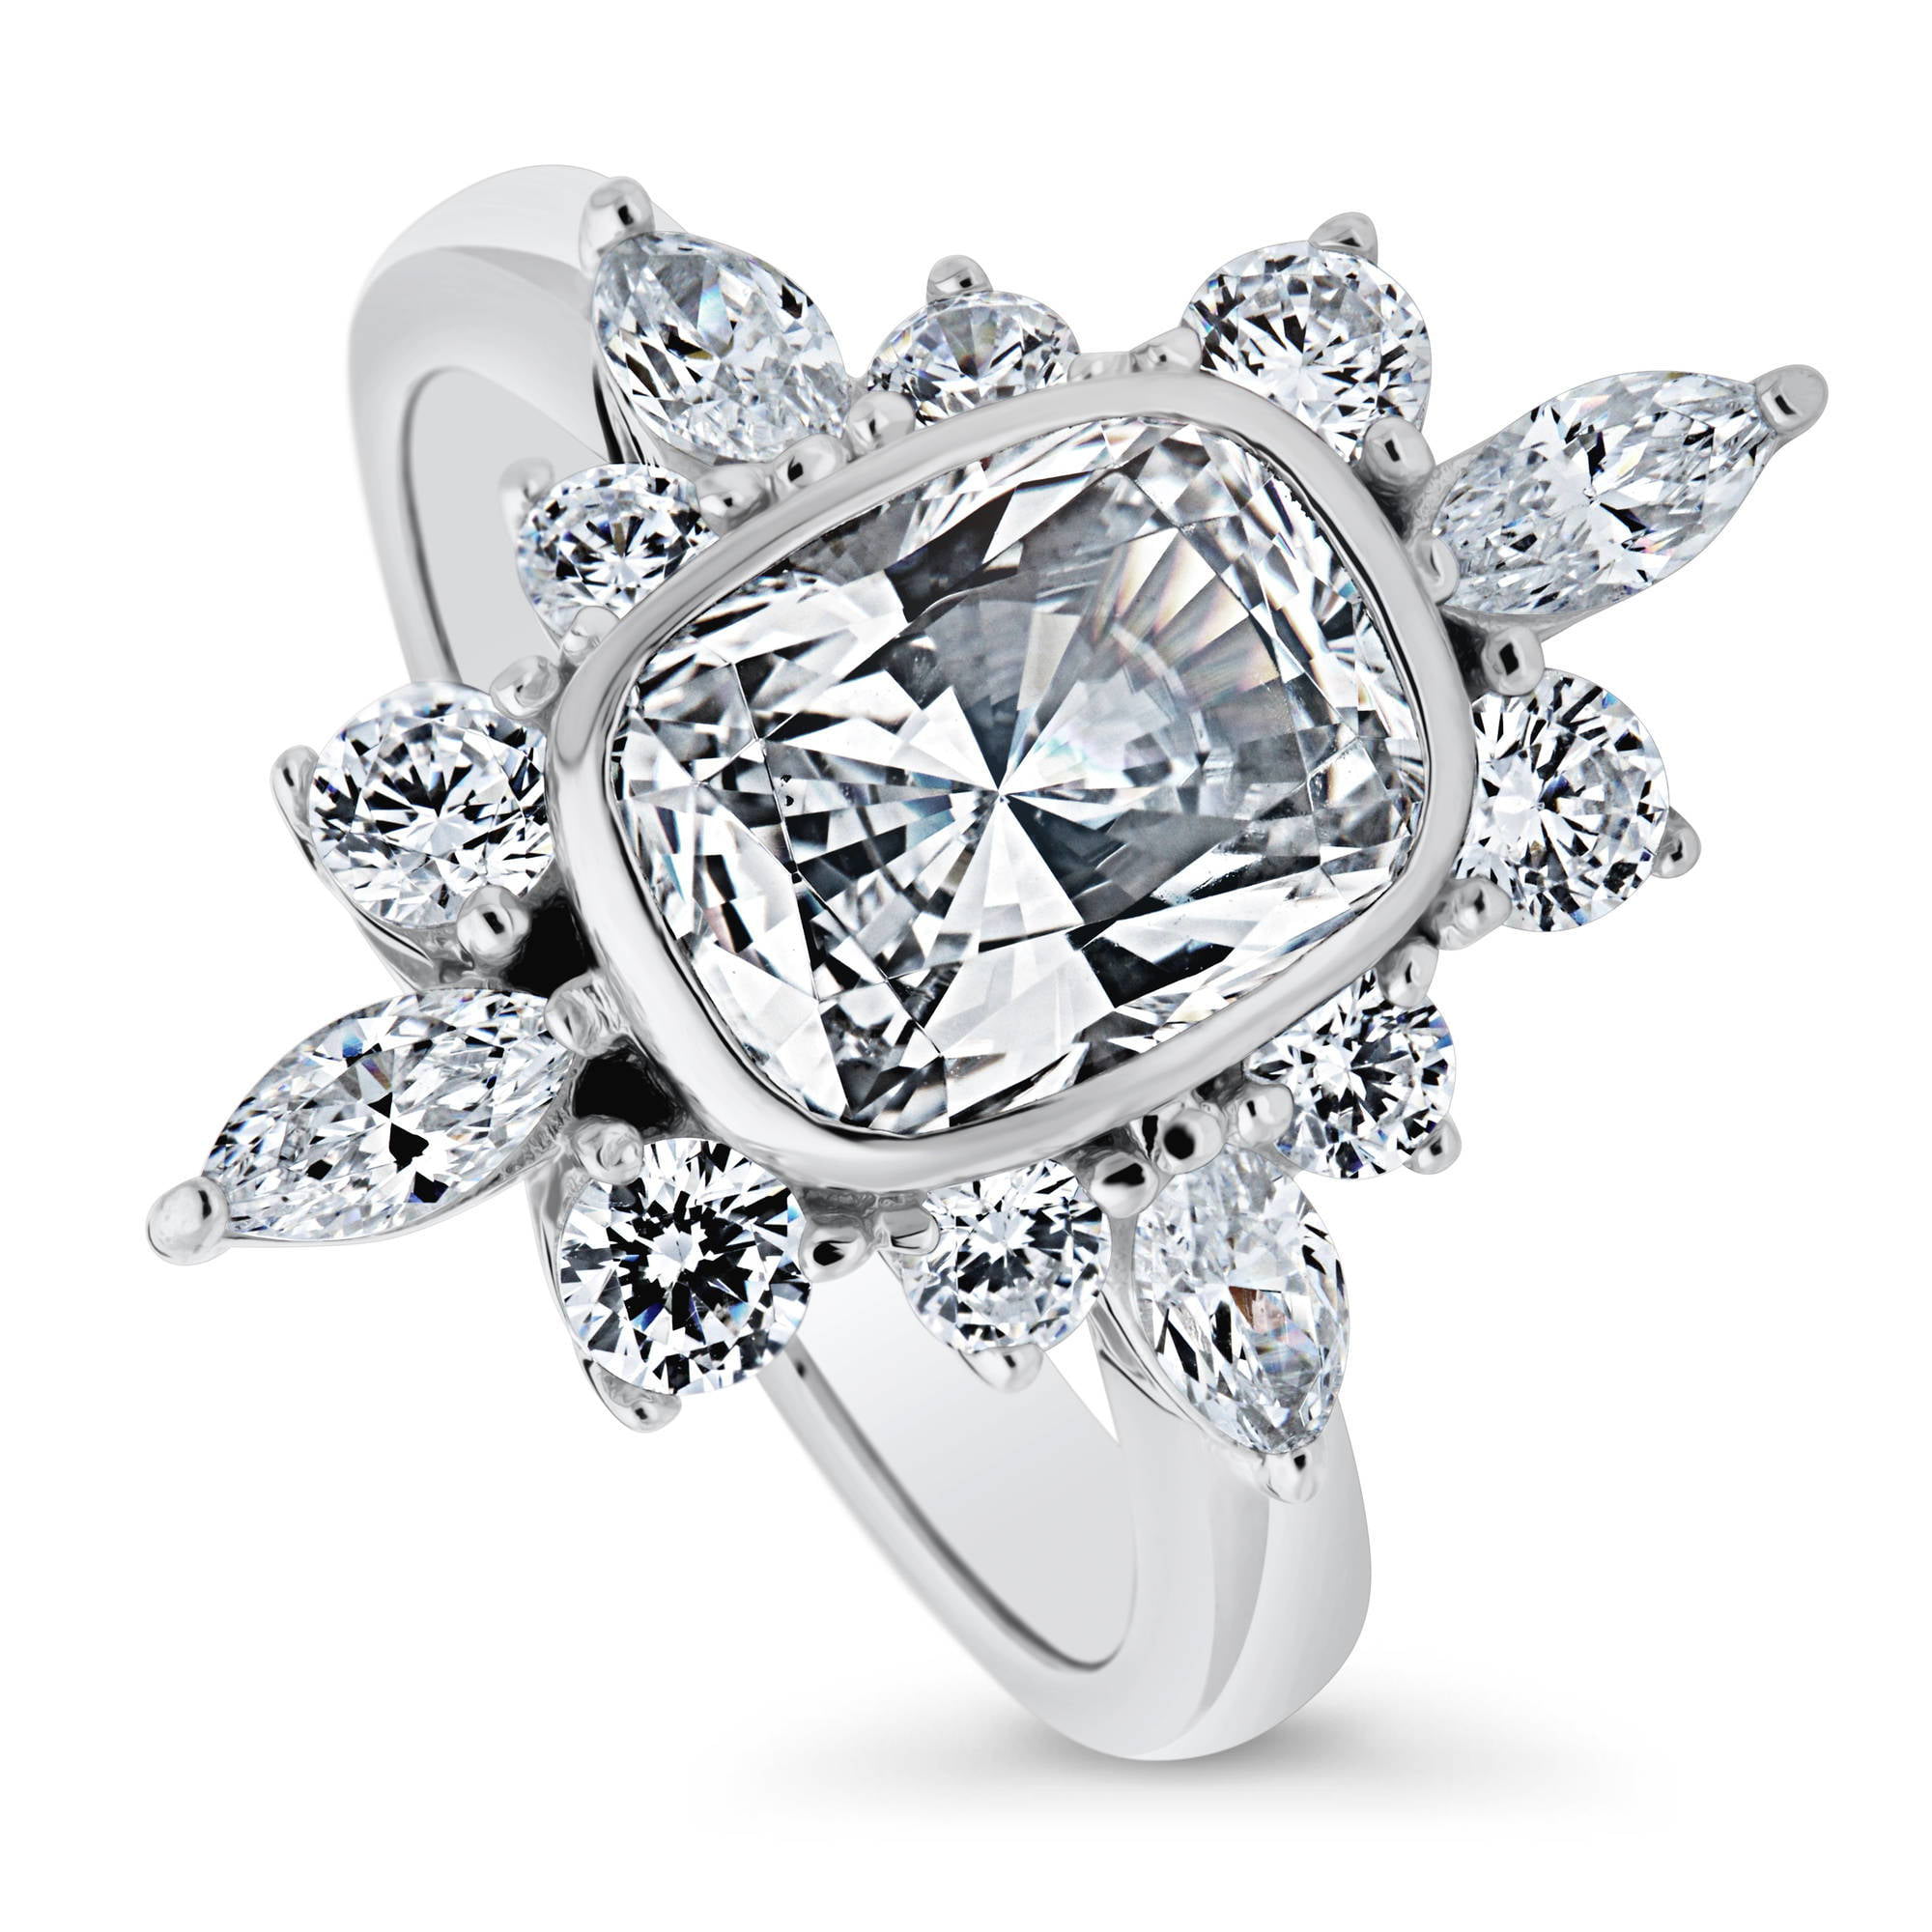 BERRICLE Rhodium Plated Sterling Silver Cubic Zirconia CZ